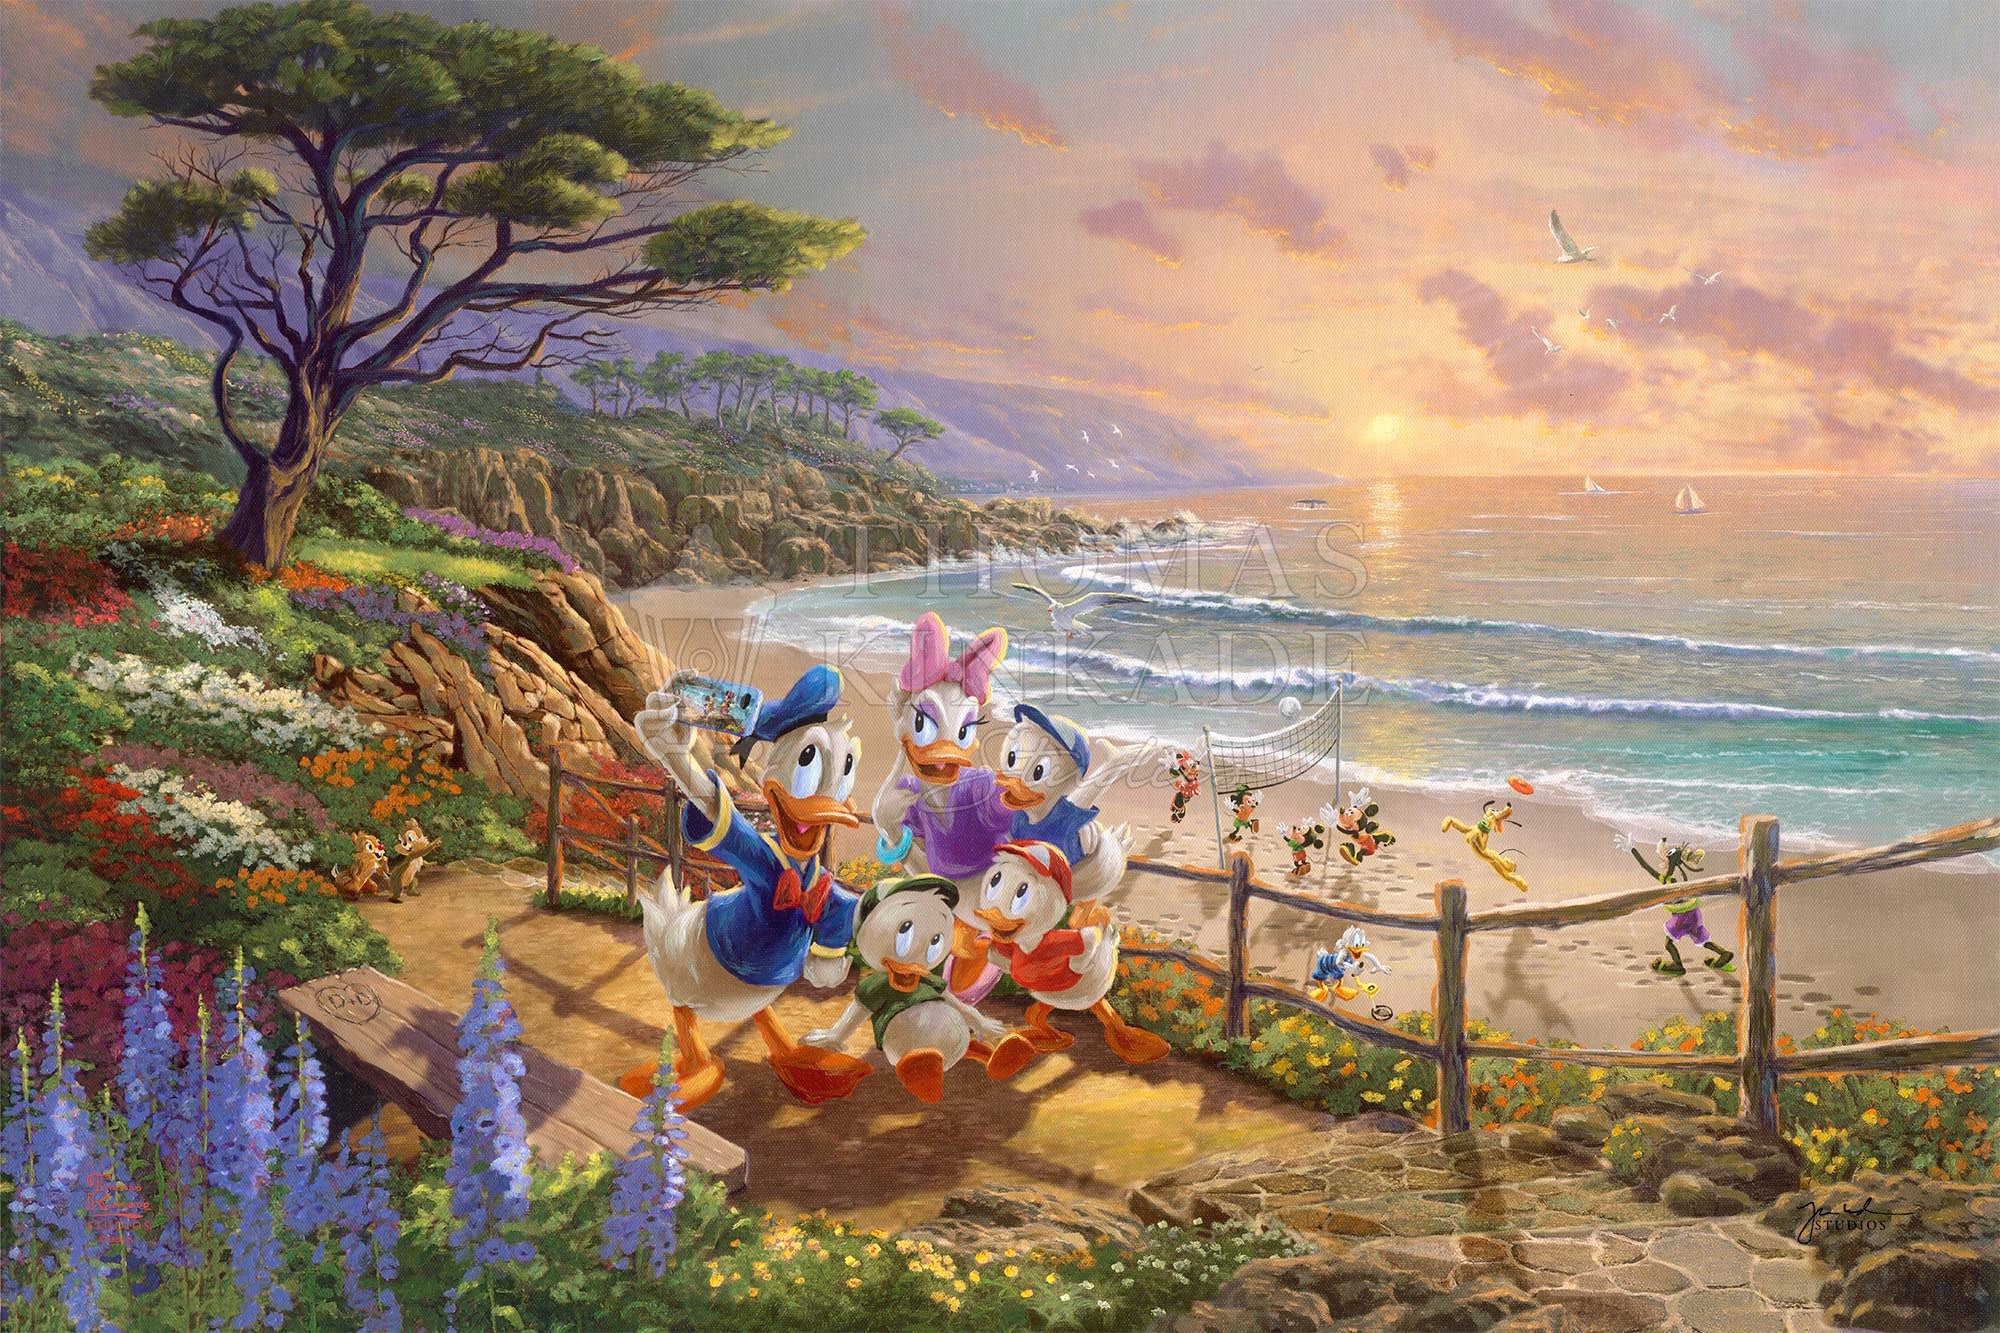 A bright sunshine highlights the coastal adventures of Donald Duck, Daisy Duck, and some of their dearest friends. 